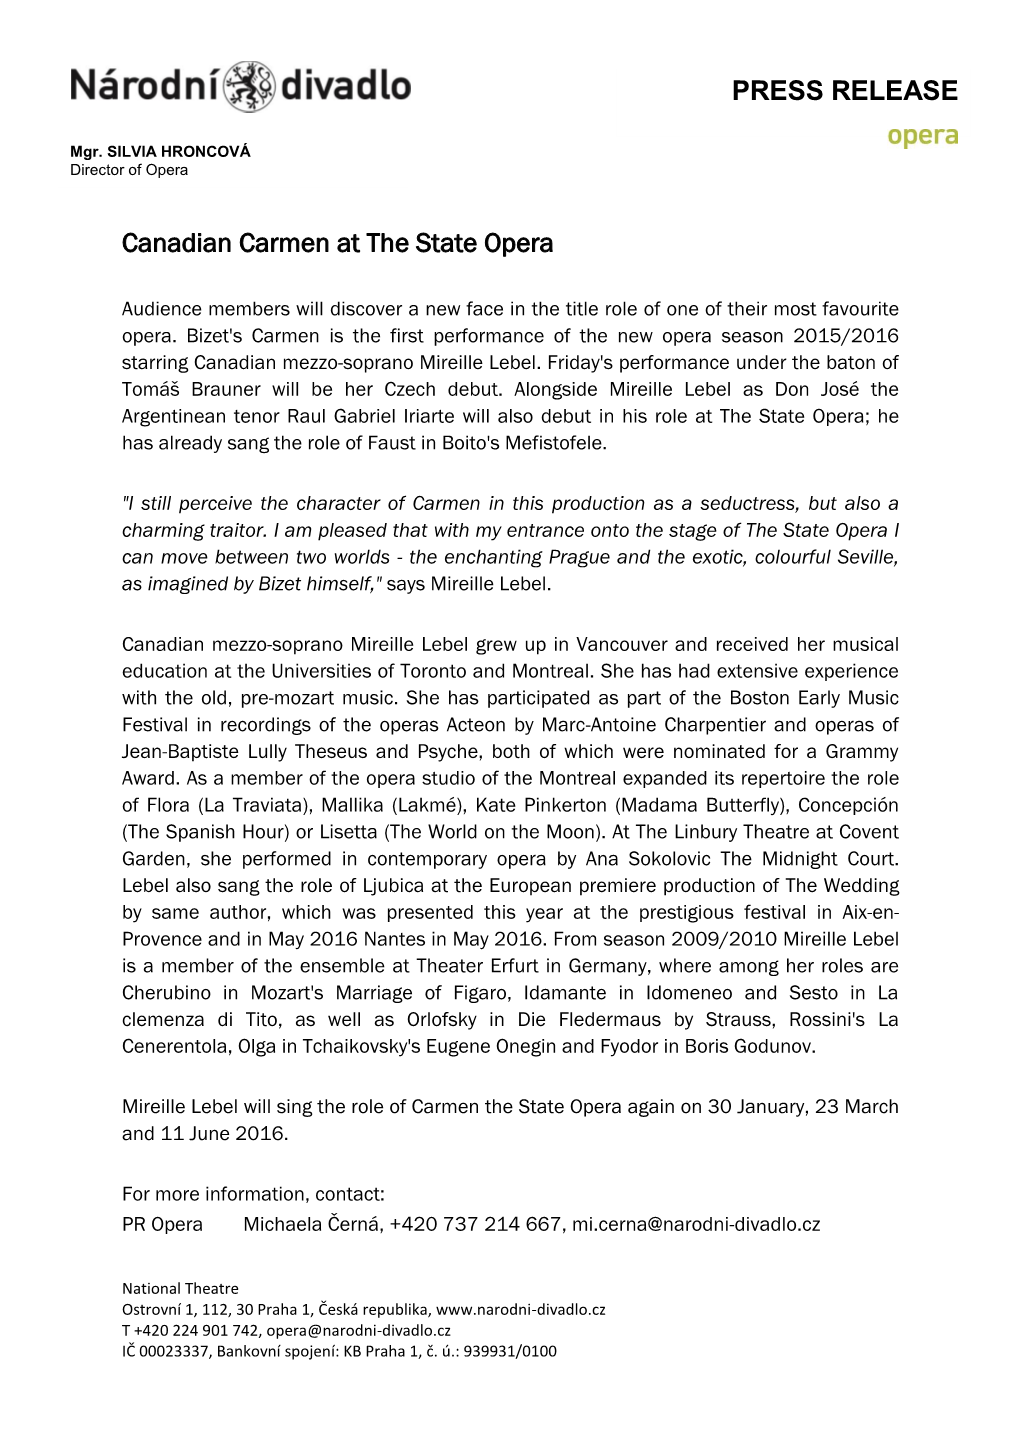 PRESS RELEASE Canadian Carmen at the State Opera